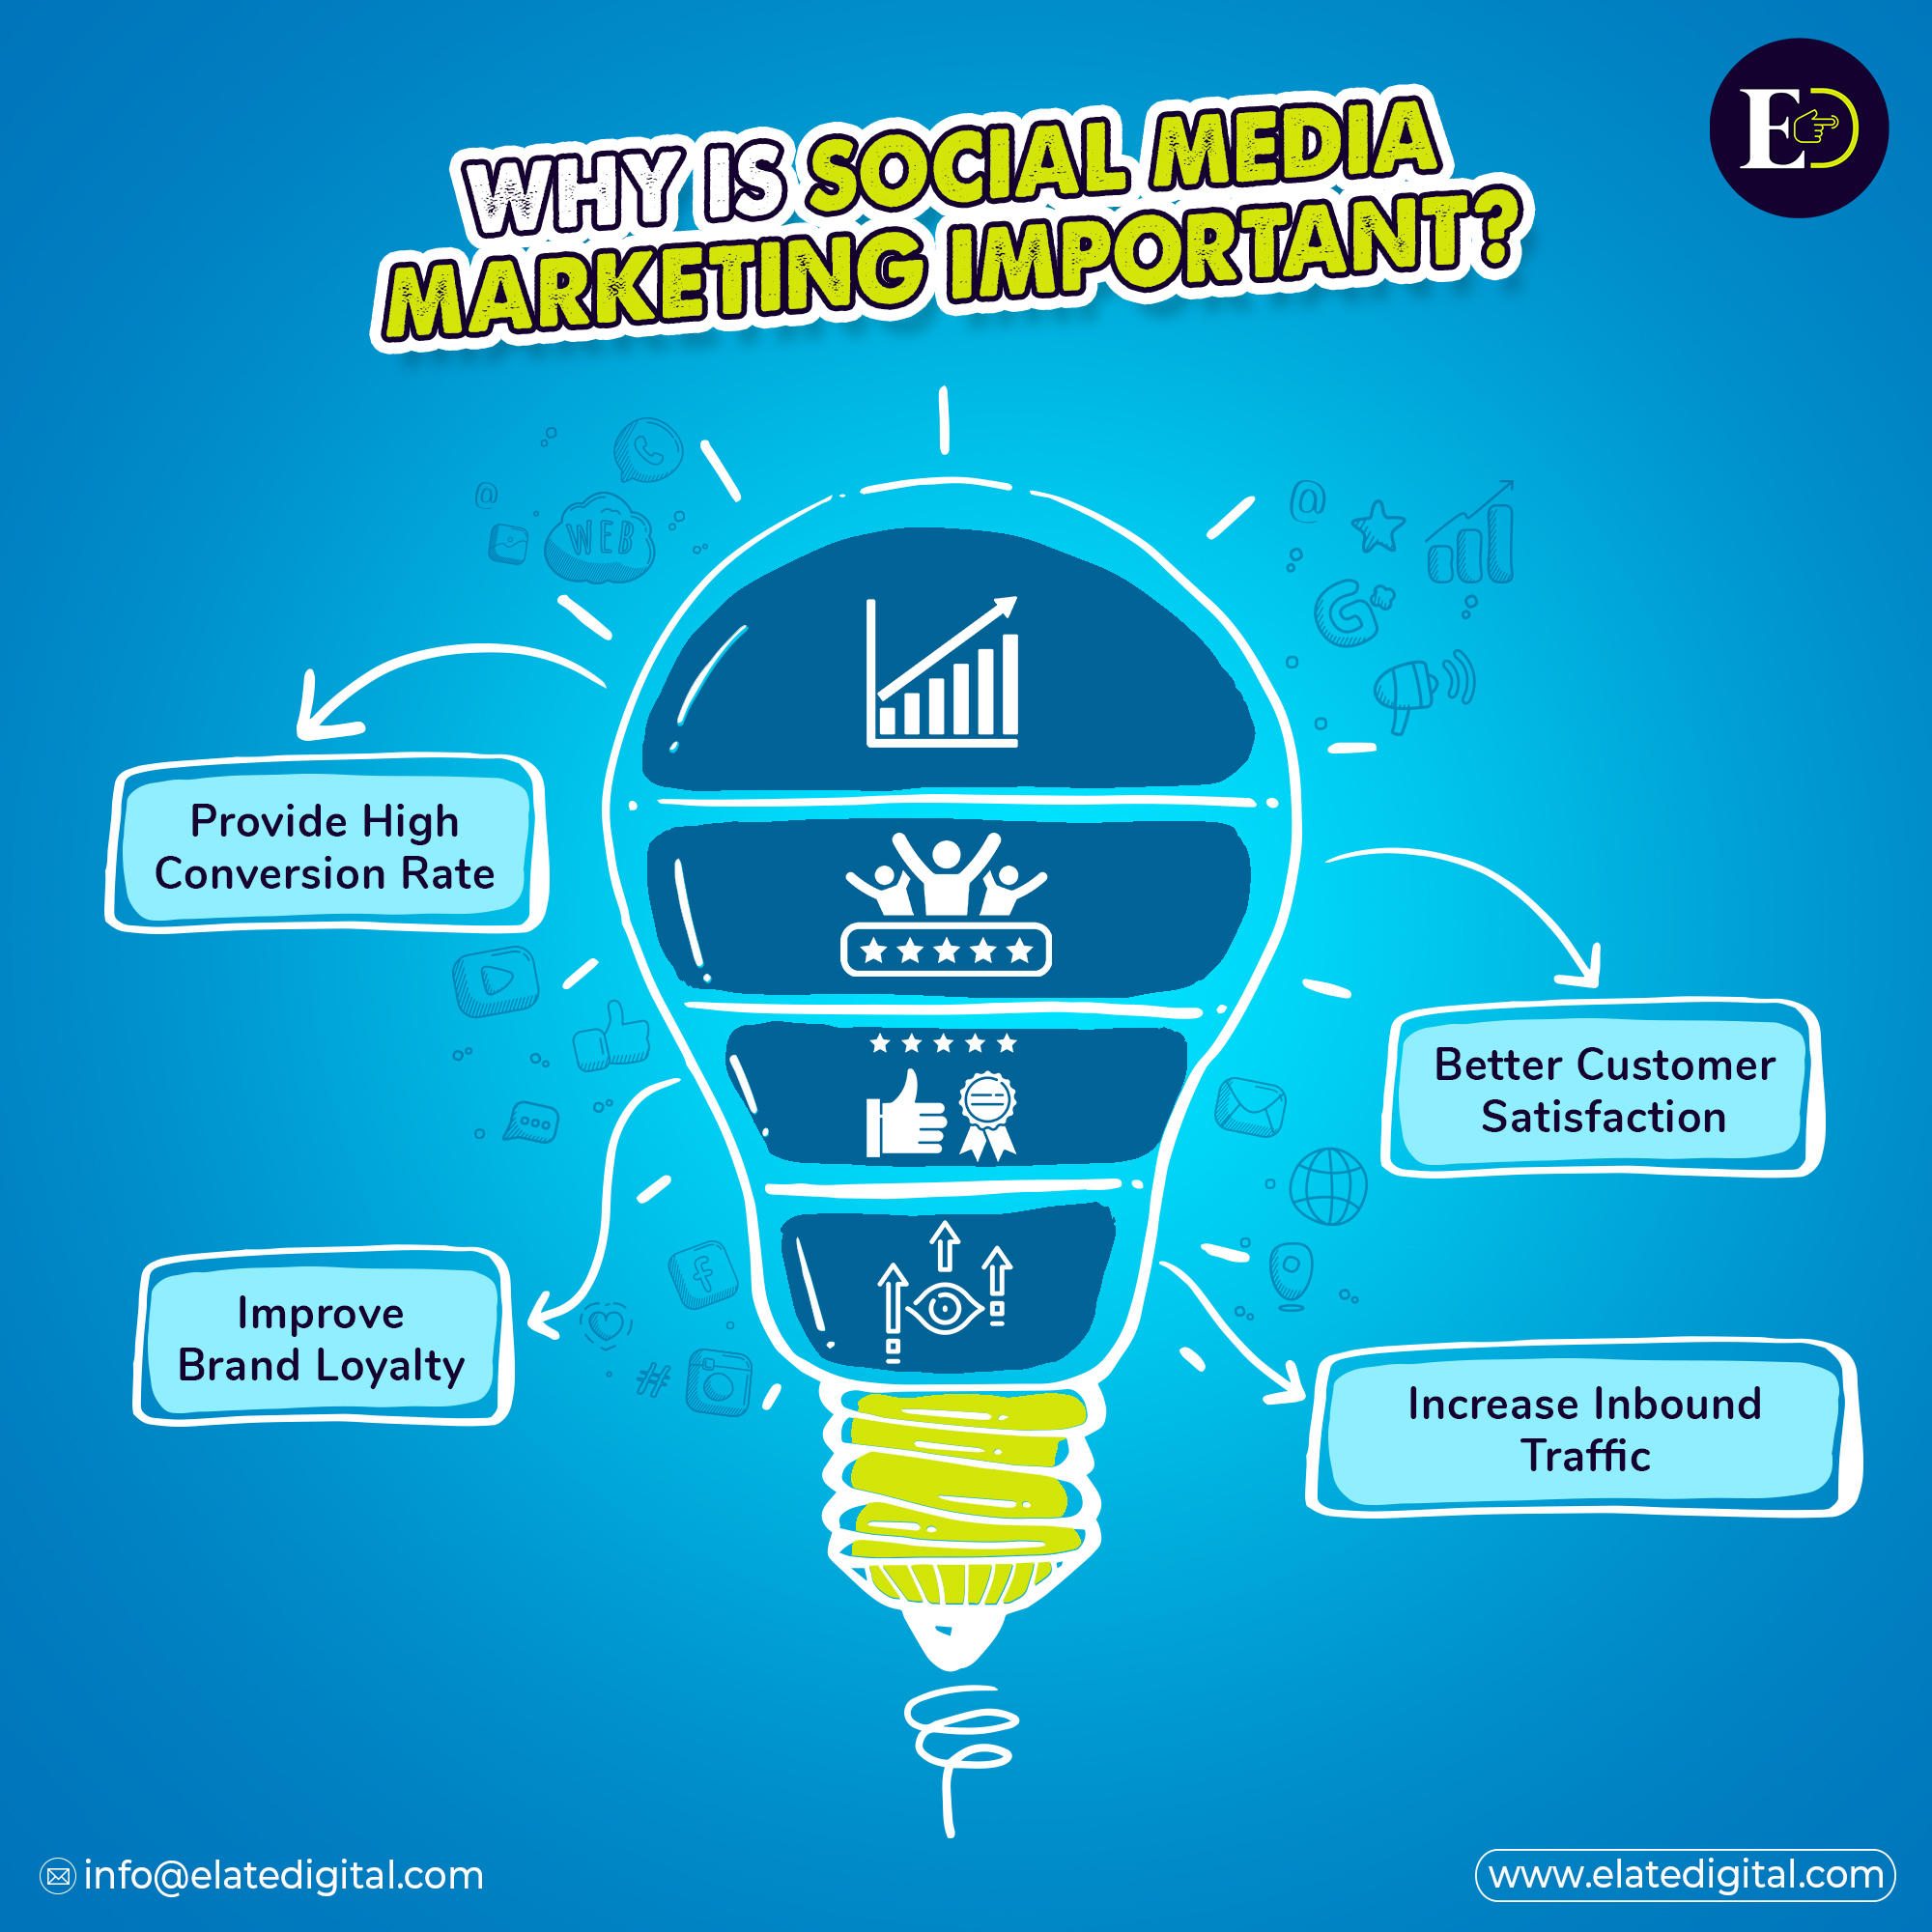 Digital Marketing Agency in IndiaServicesAdvertising - DesignGurgaonNew Colony